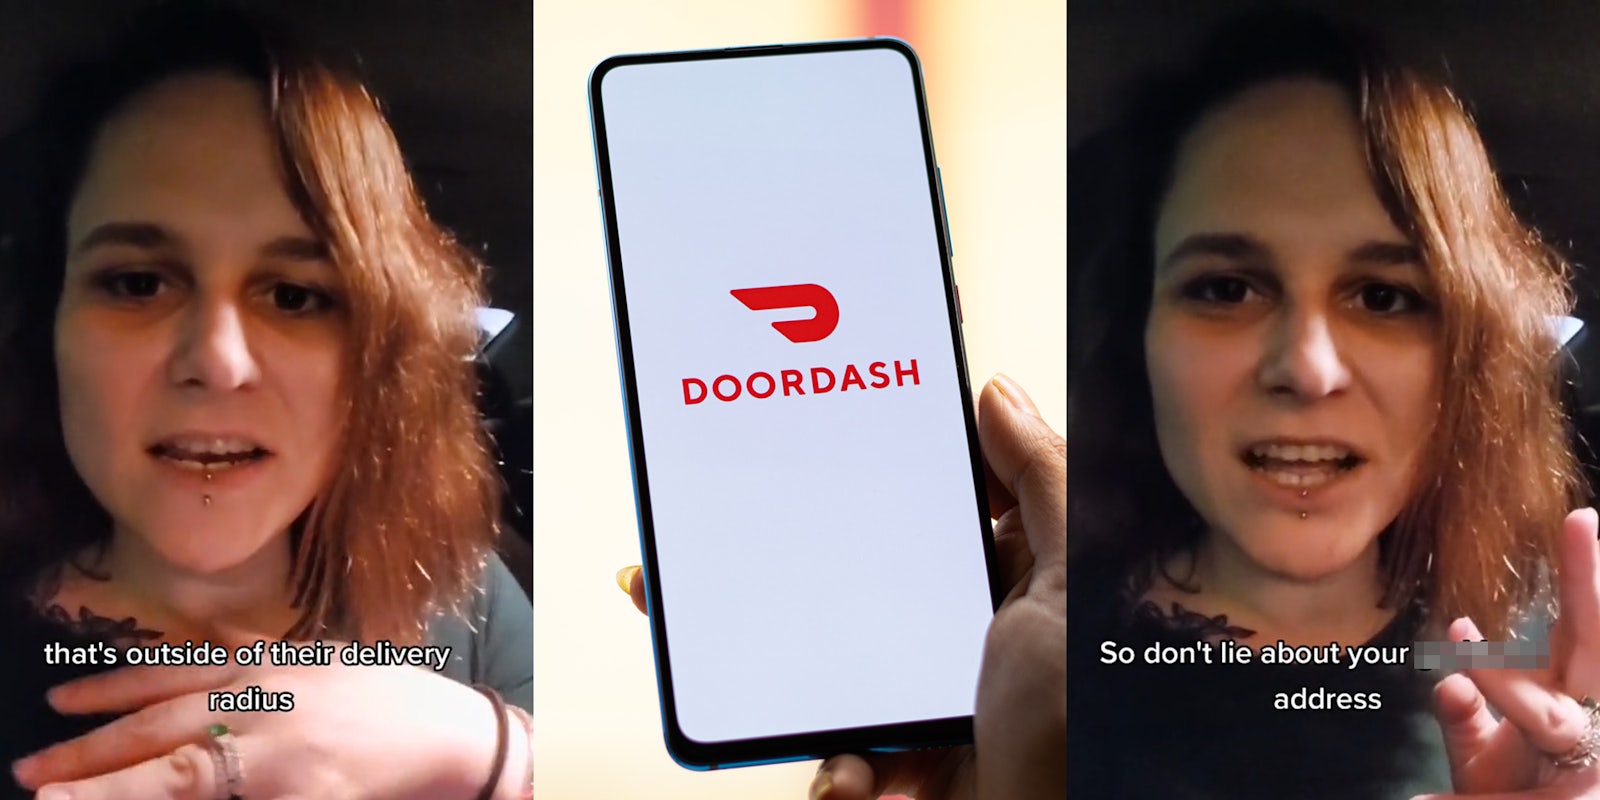 DoorDash driver speaking in car with caption 'that's outside of their delivery radius' (l) DoorDash on phone in hand in front of blurred tan background (c) DoorDash driver speaking in car with caption 'So don't lie about your blank address' (r)